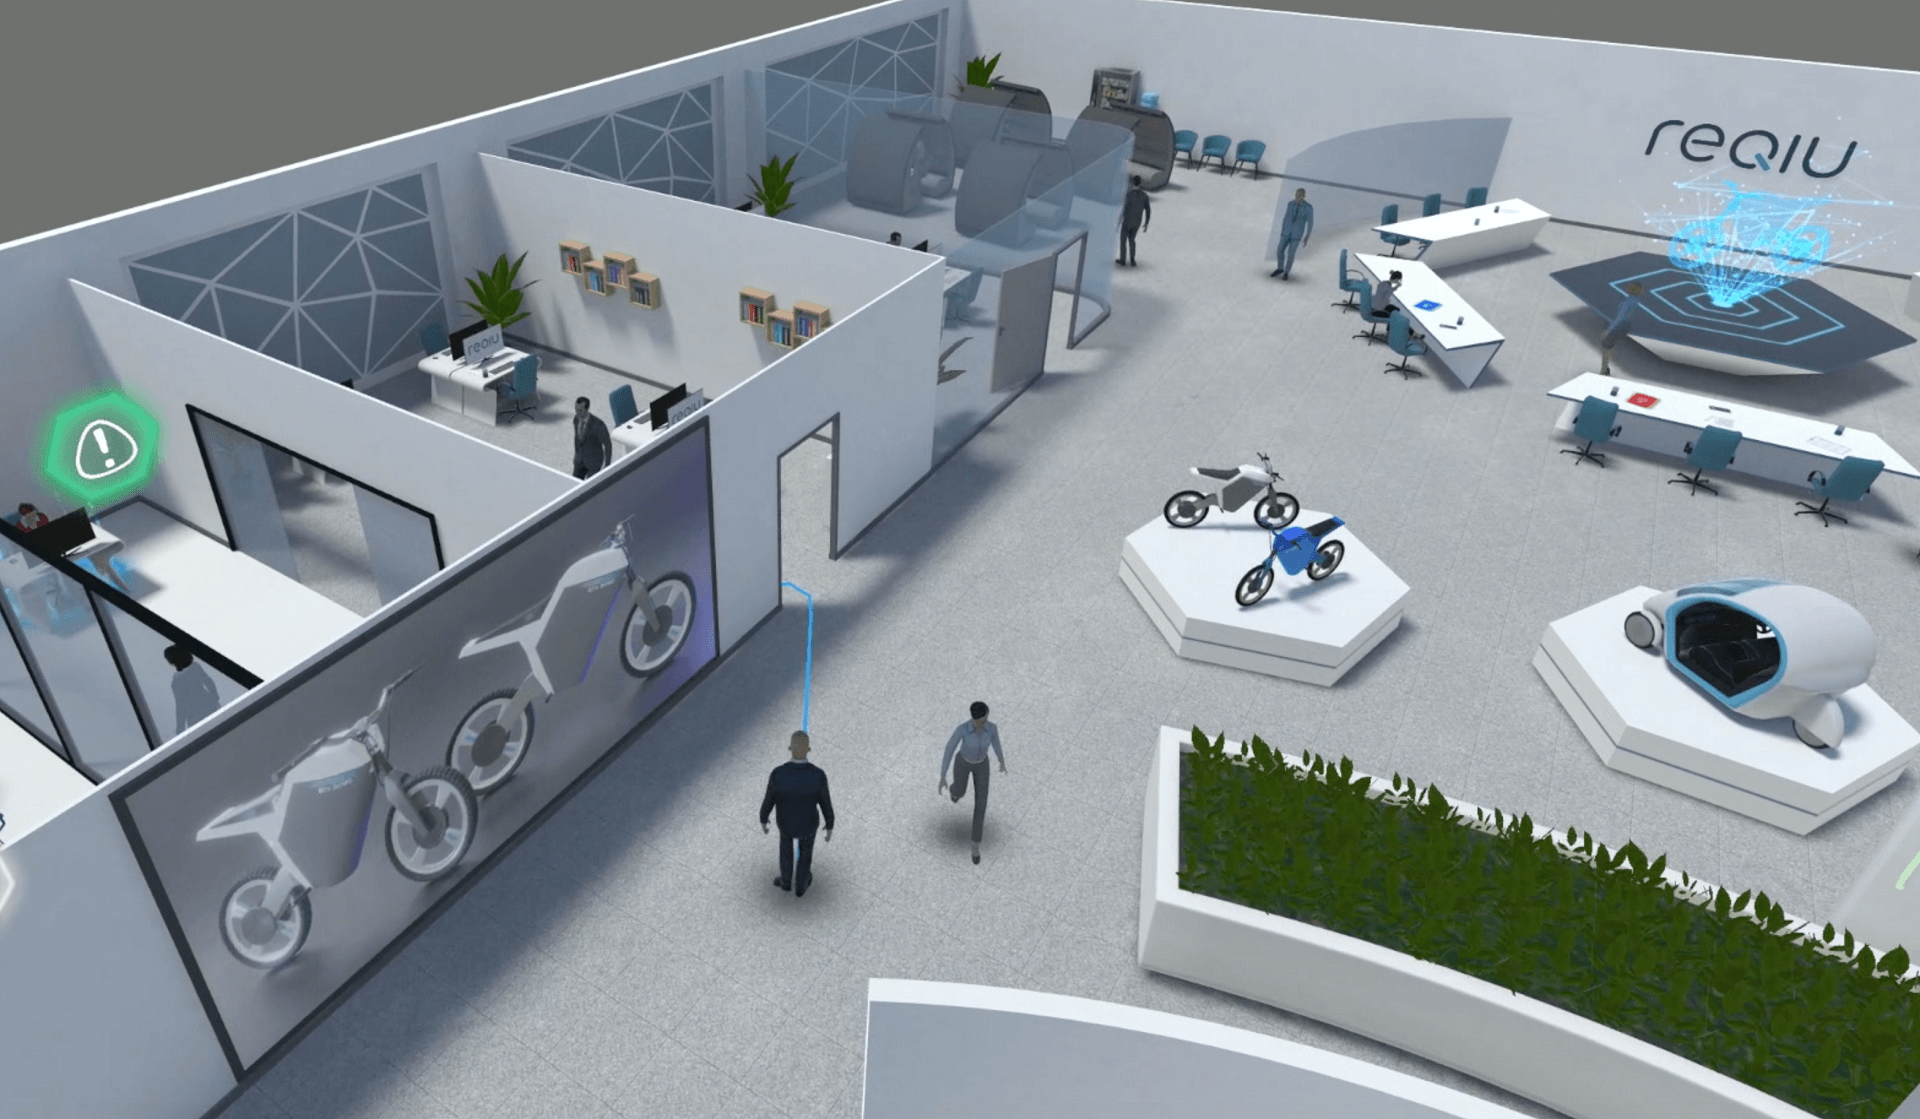 View from the game, animation. Modern office space with moving employees and green areas. In the center is an island with motorbikes, indicating the type of activity of the enterprise. The blue line in front of one of the walking men shows the direction he is going. In the neighboring box, there is a green exclamation mark above the person working at the desk